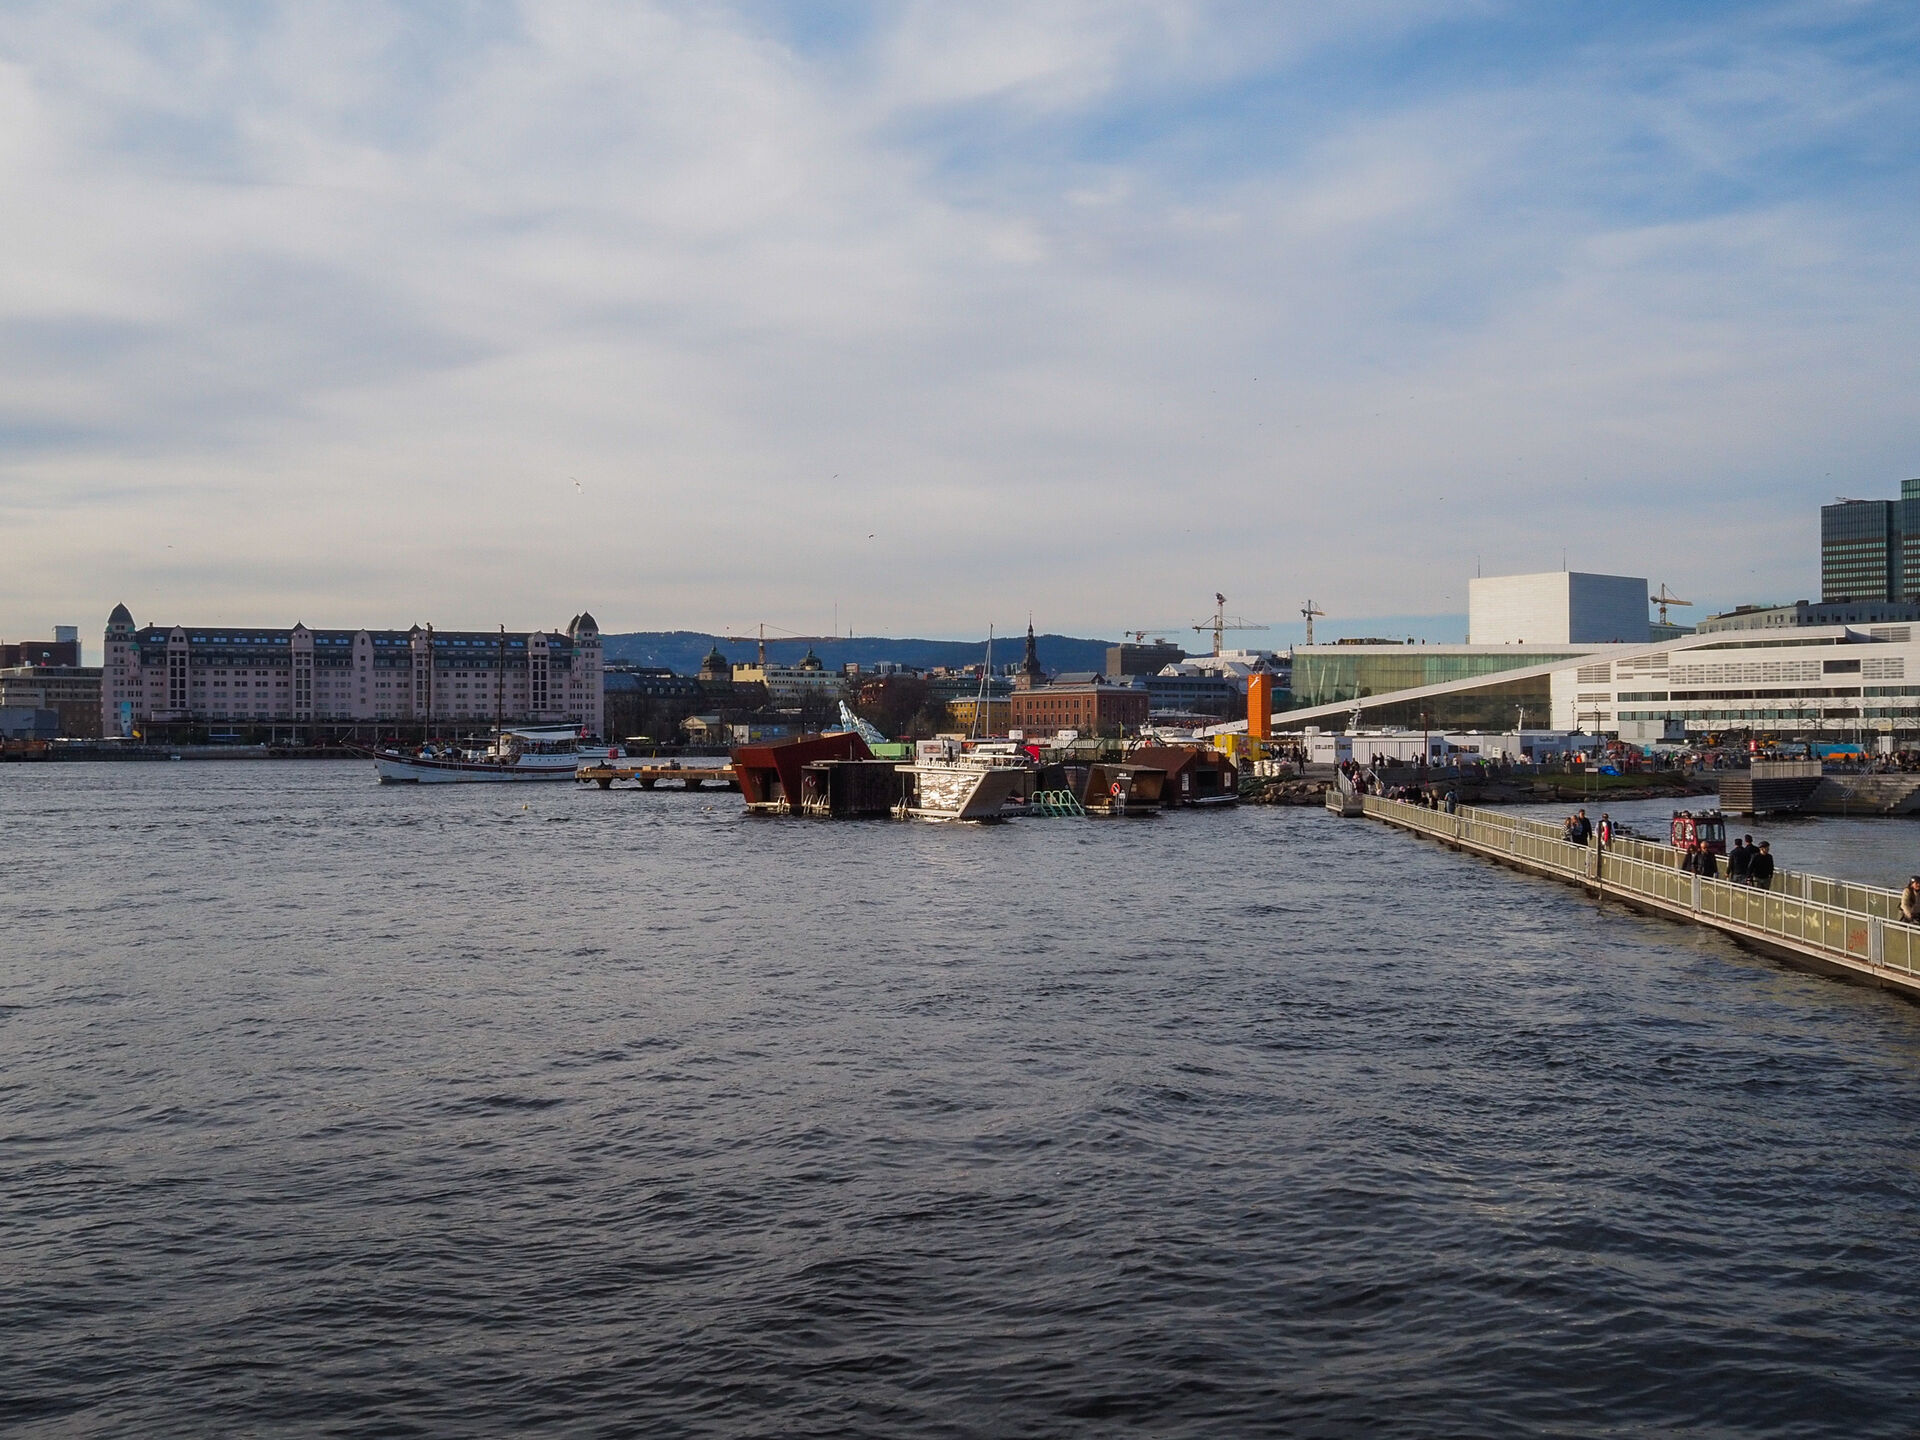 The Oslo fjord with the Opera House in the background.